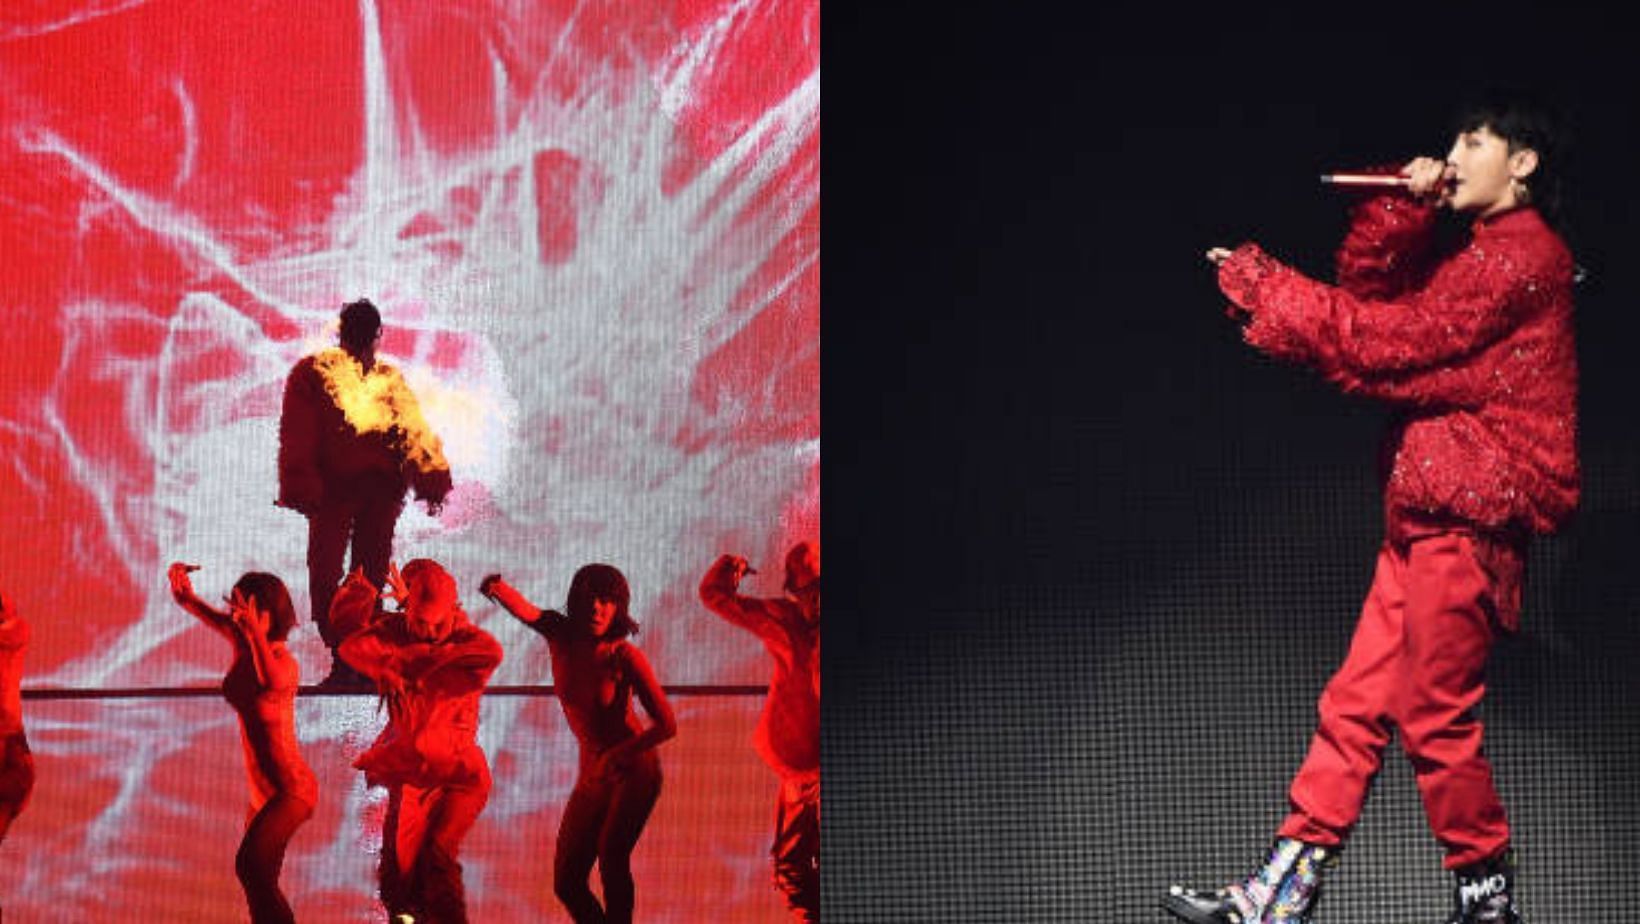 0.TO.10 Tour by BIGBANG. (Images via GETTY/Michael Loccisano / Staff)